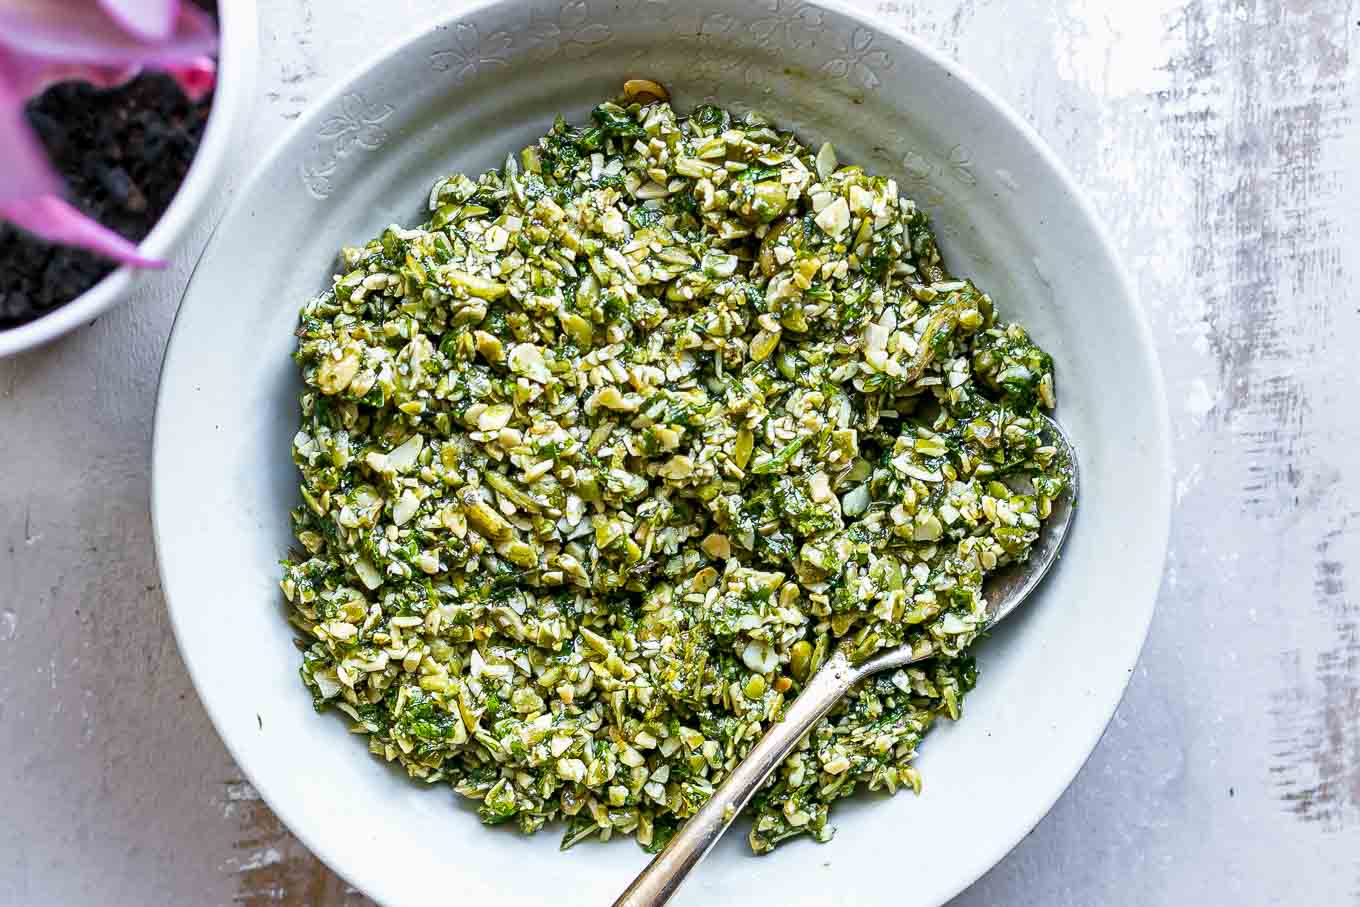 pesto sauce with mint leaves in a bowl on a white table